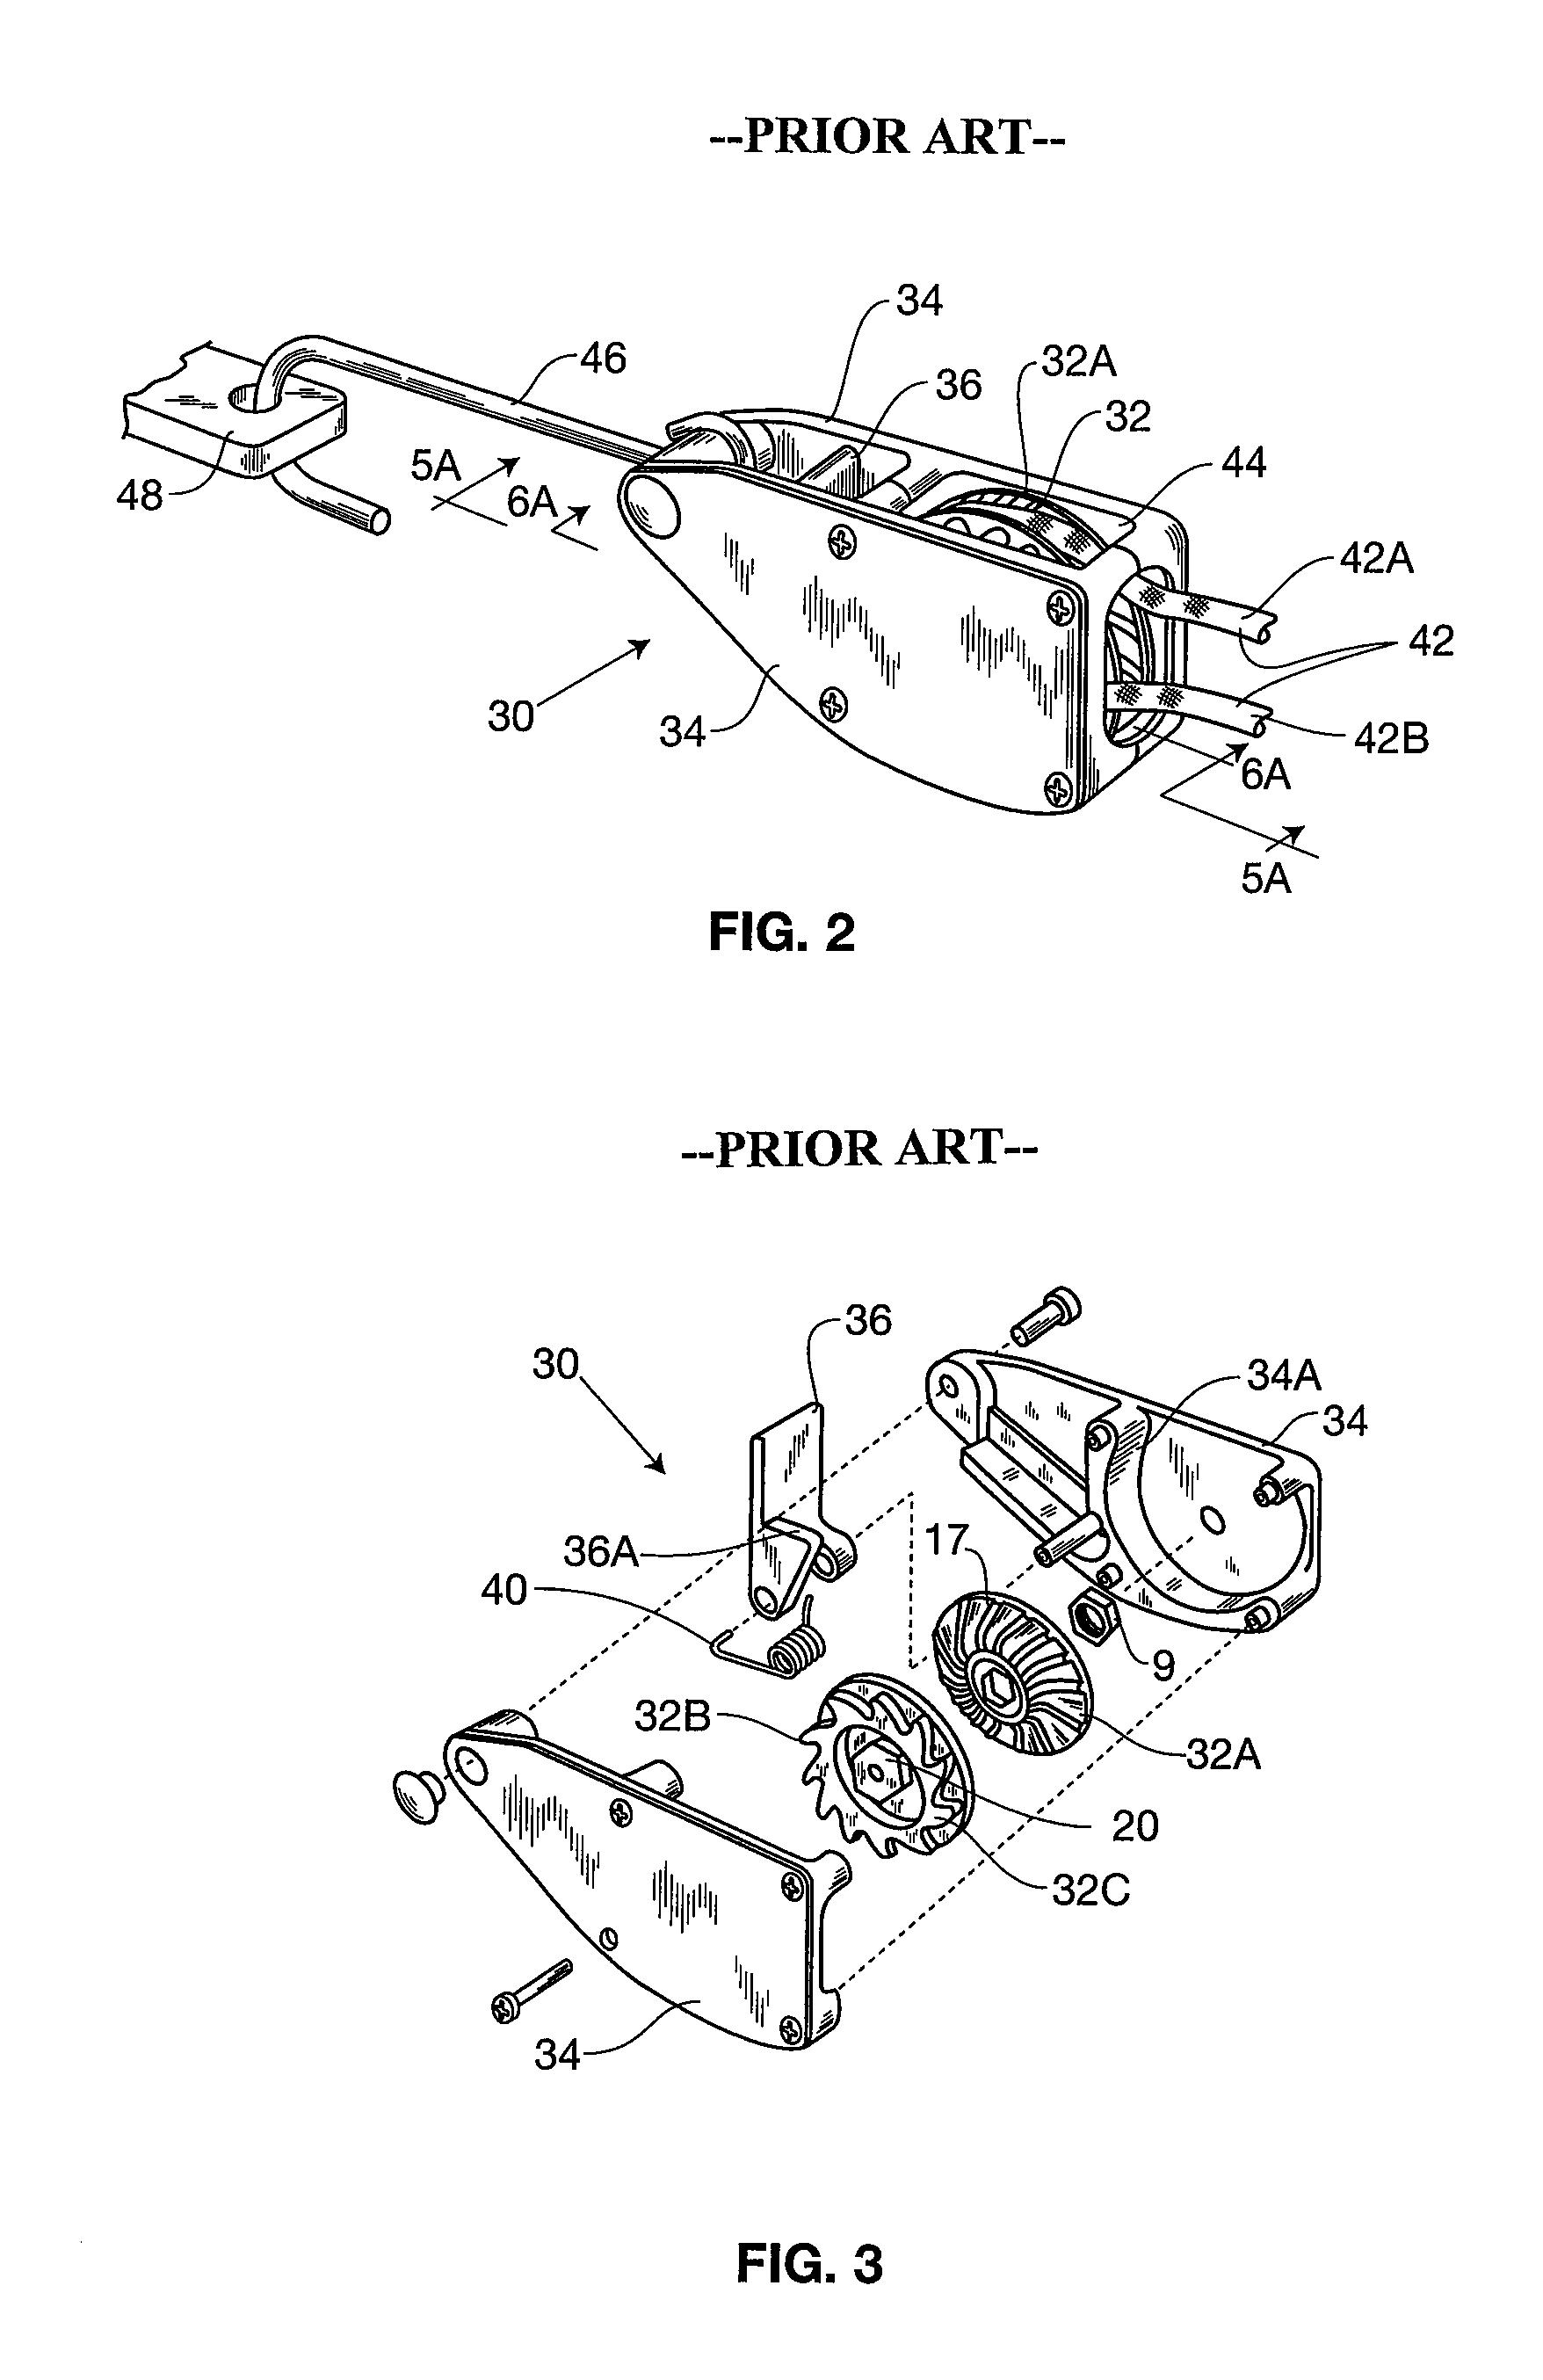 Ratchet pulley device for tightening cords or ropes